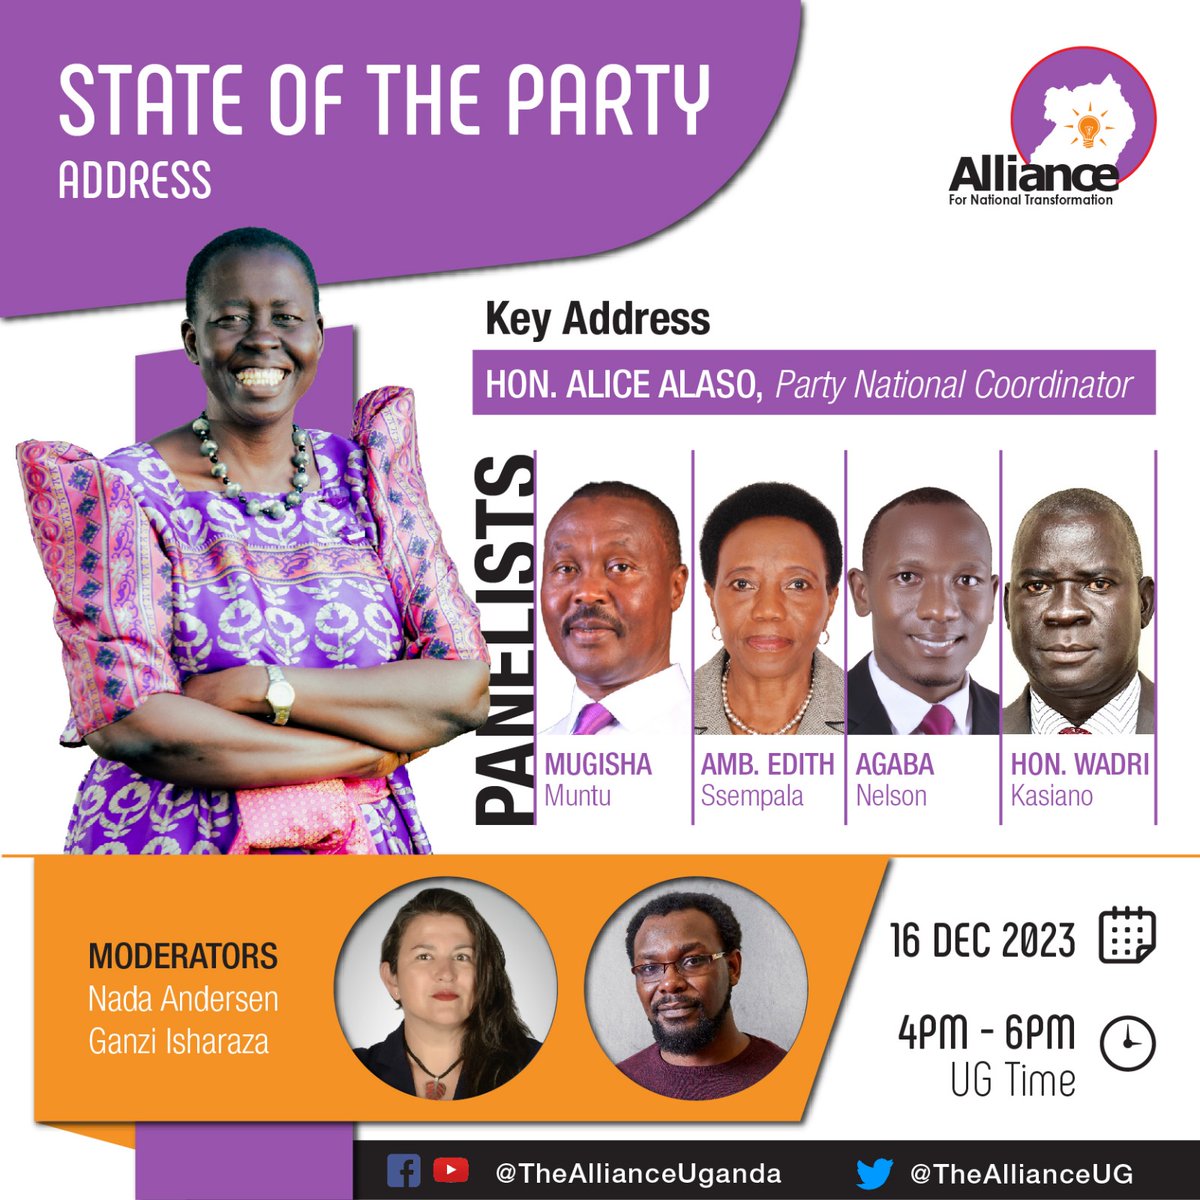 Almost three years ago, @TheAllianceUG was formed. On Saturday 16th, I will join Hon @OfficialAlaso and other party officials in a State of the Party Address to give Ugandans a full account of our activities to date & vision for the future. Join in the discussion if you can.